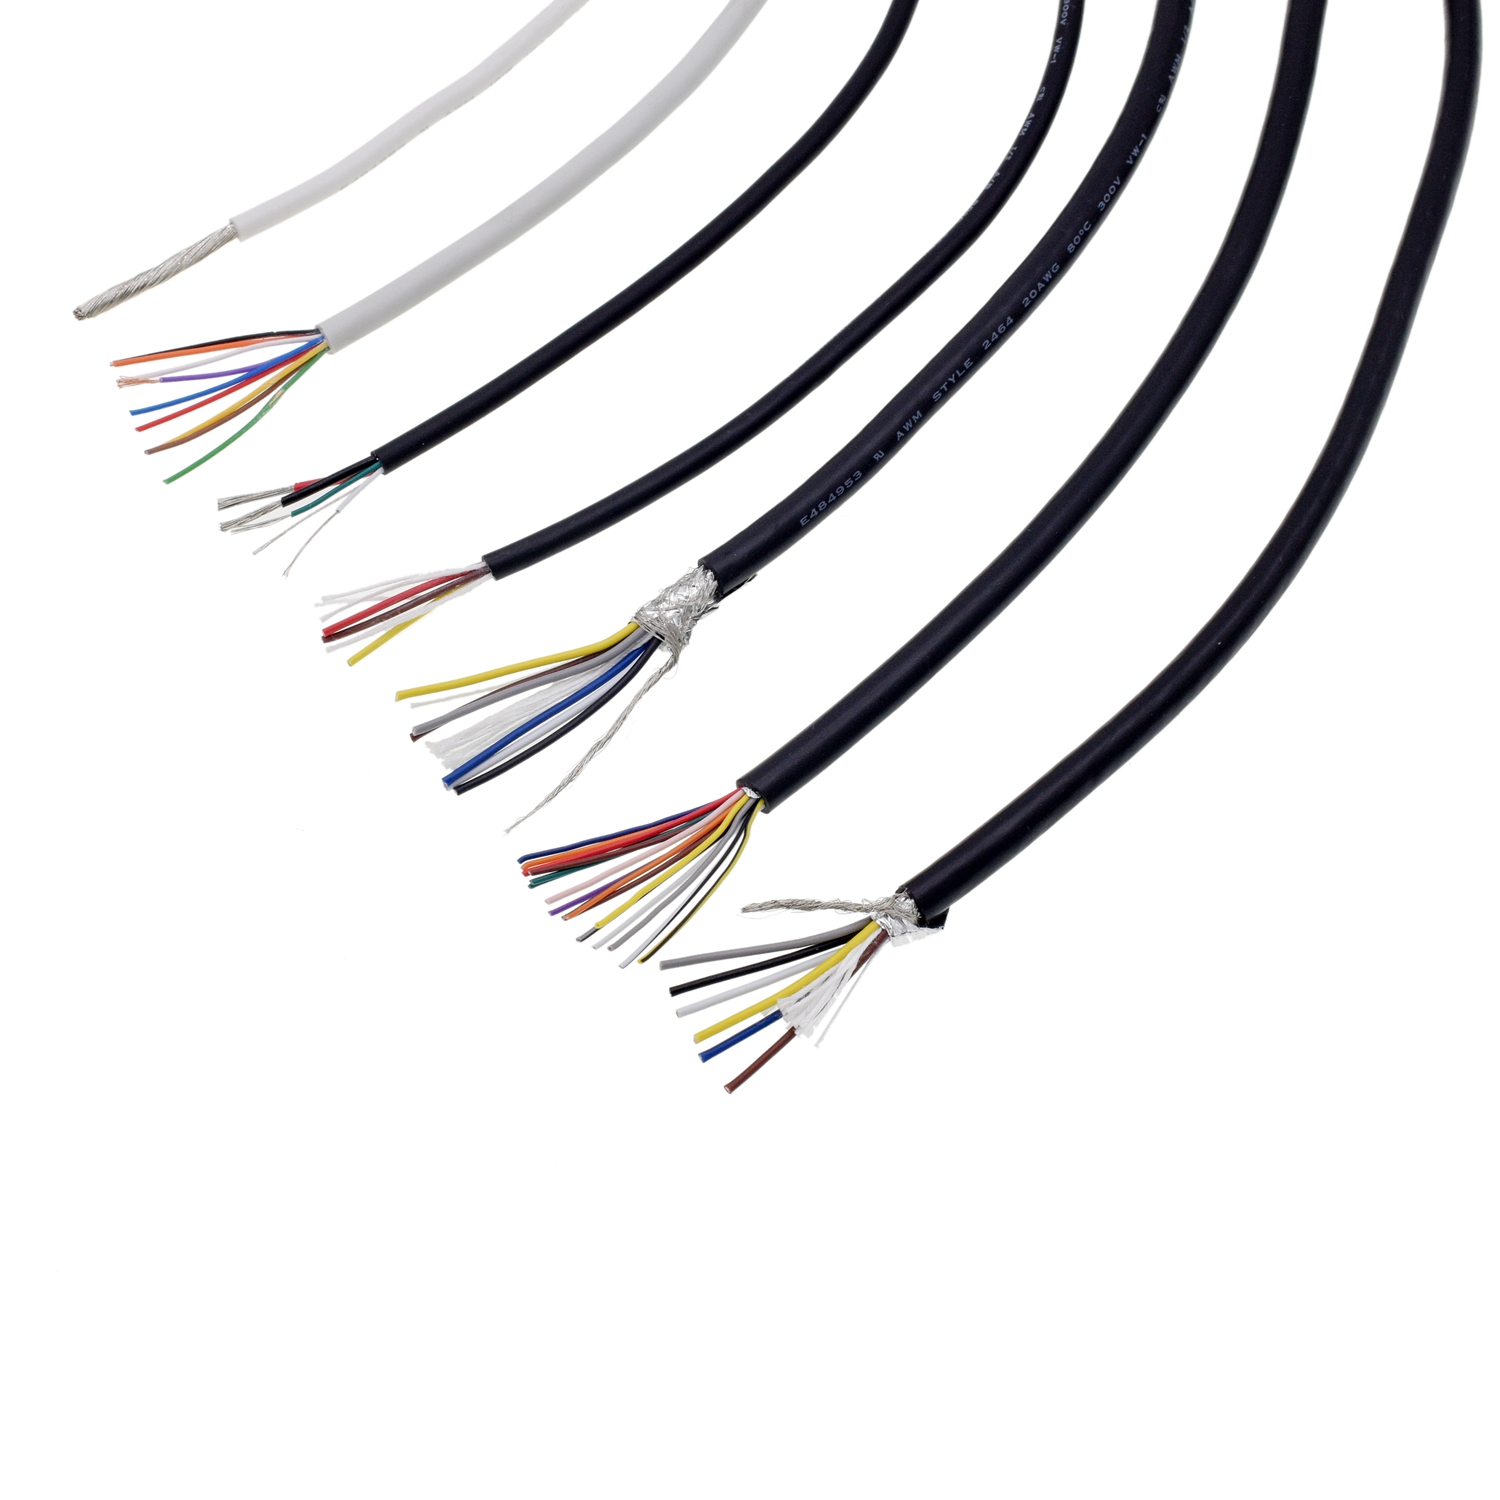 UL20276 AWM Flexible Data Transmission Cable Power Cable